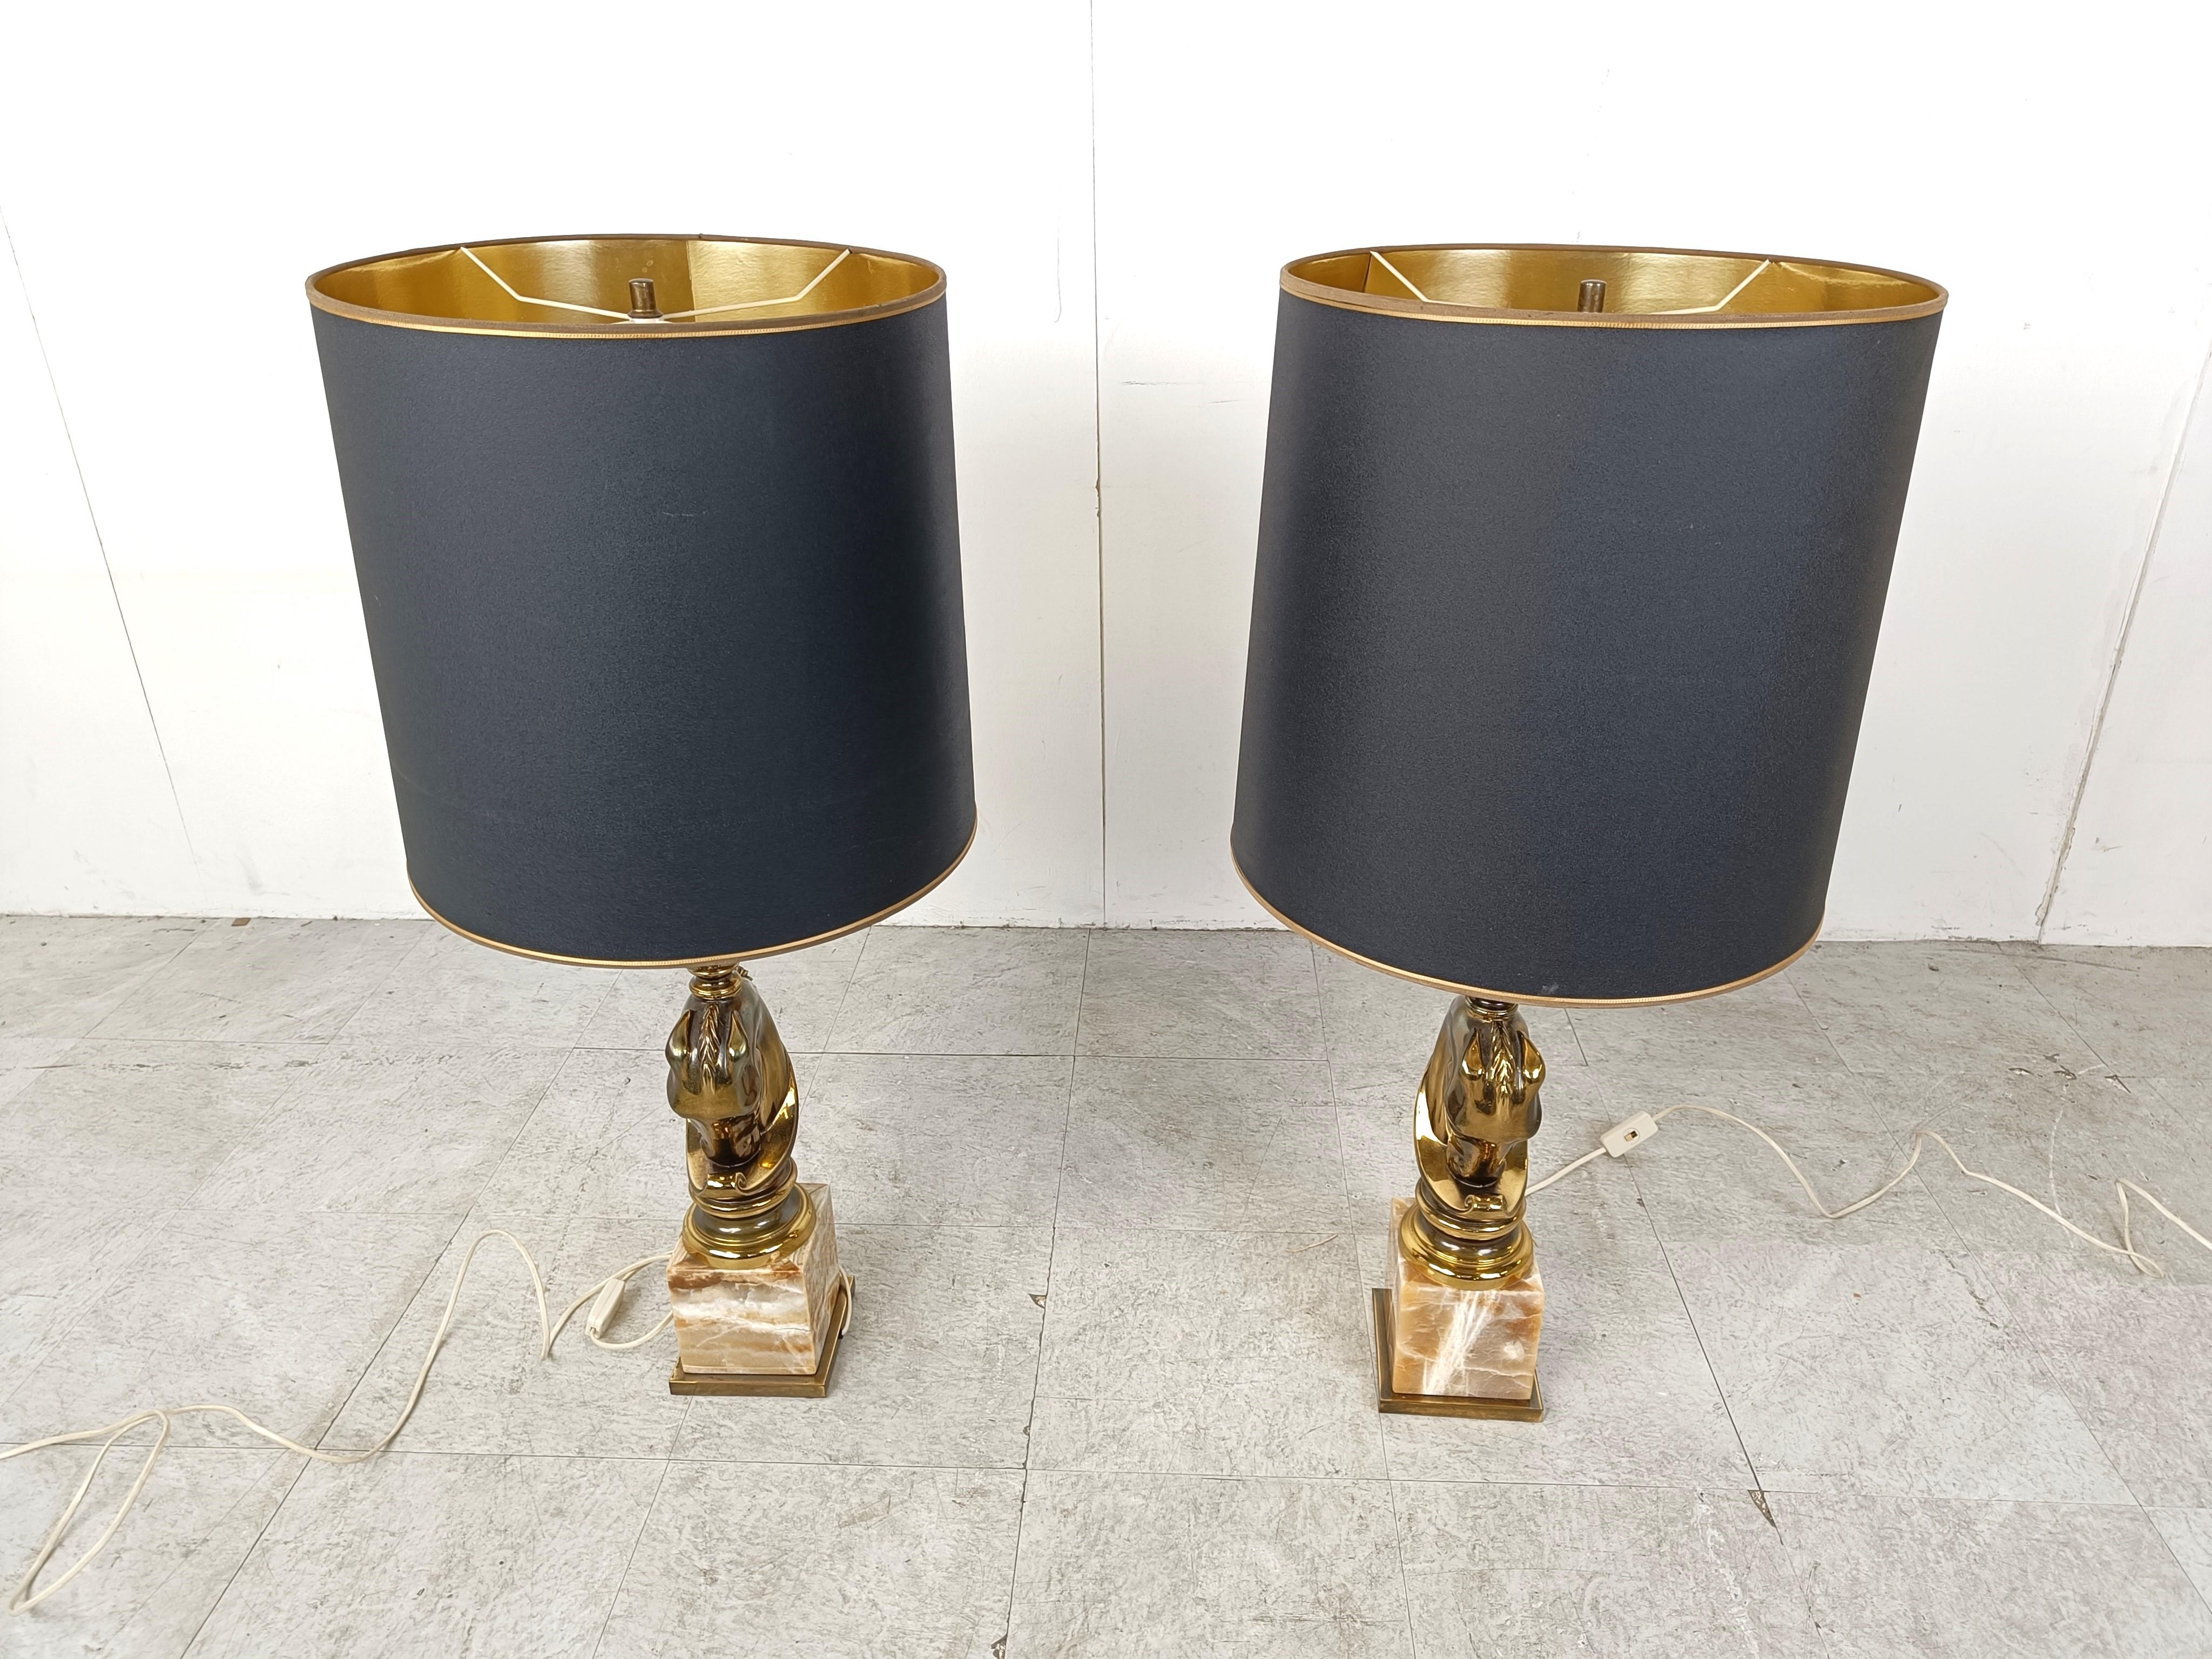 Hollywood Regency Pair of Brass Horse Head Table Lamps, 1970s Belgium For Sale